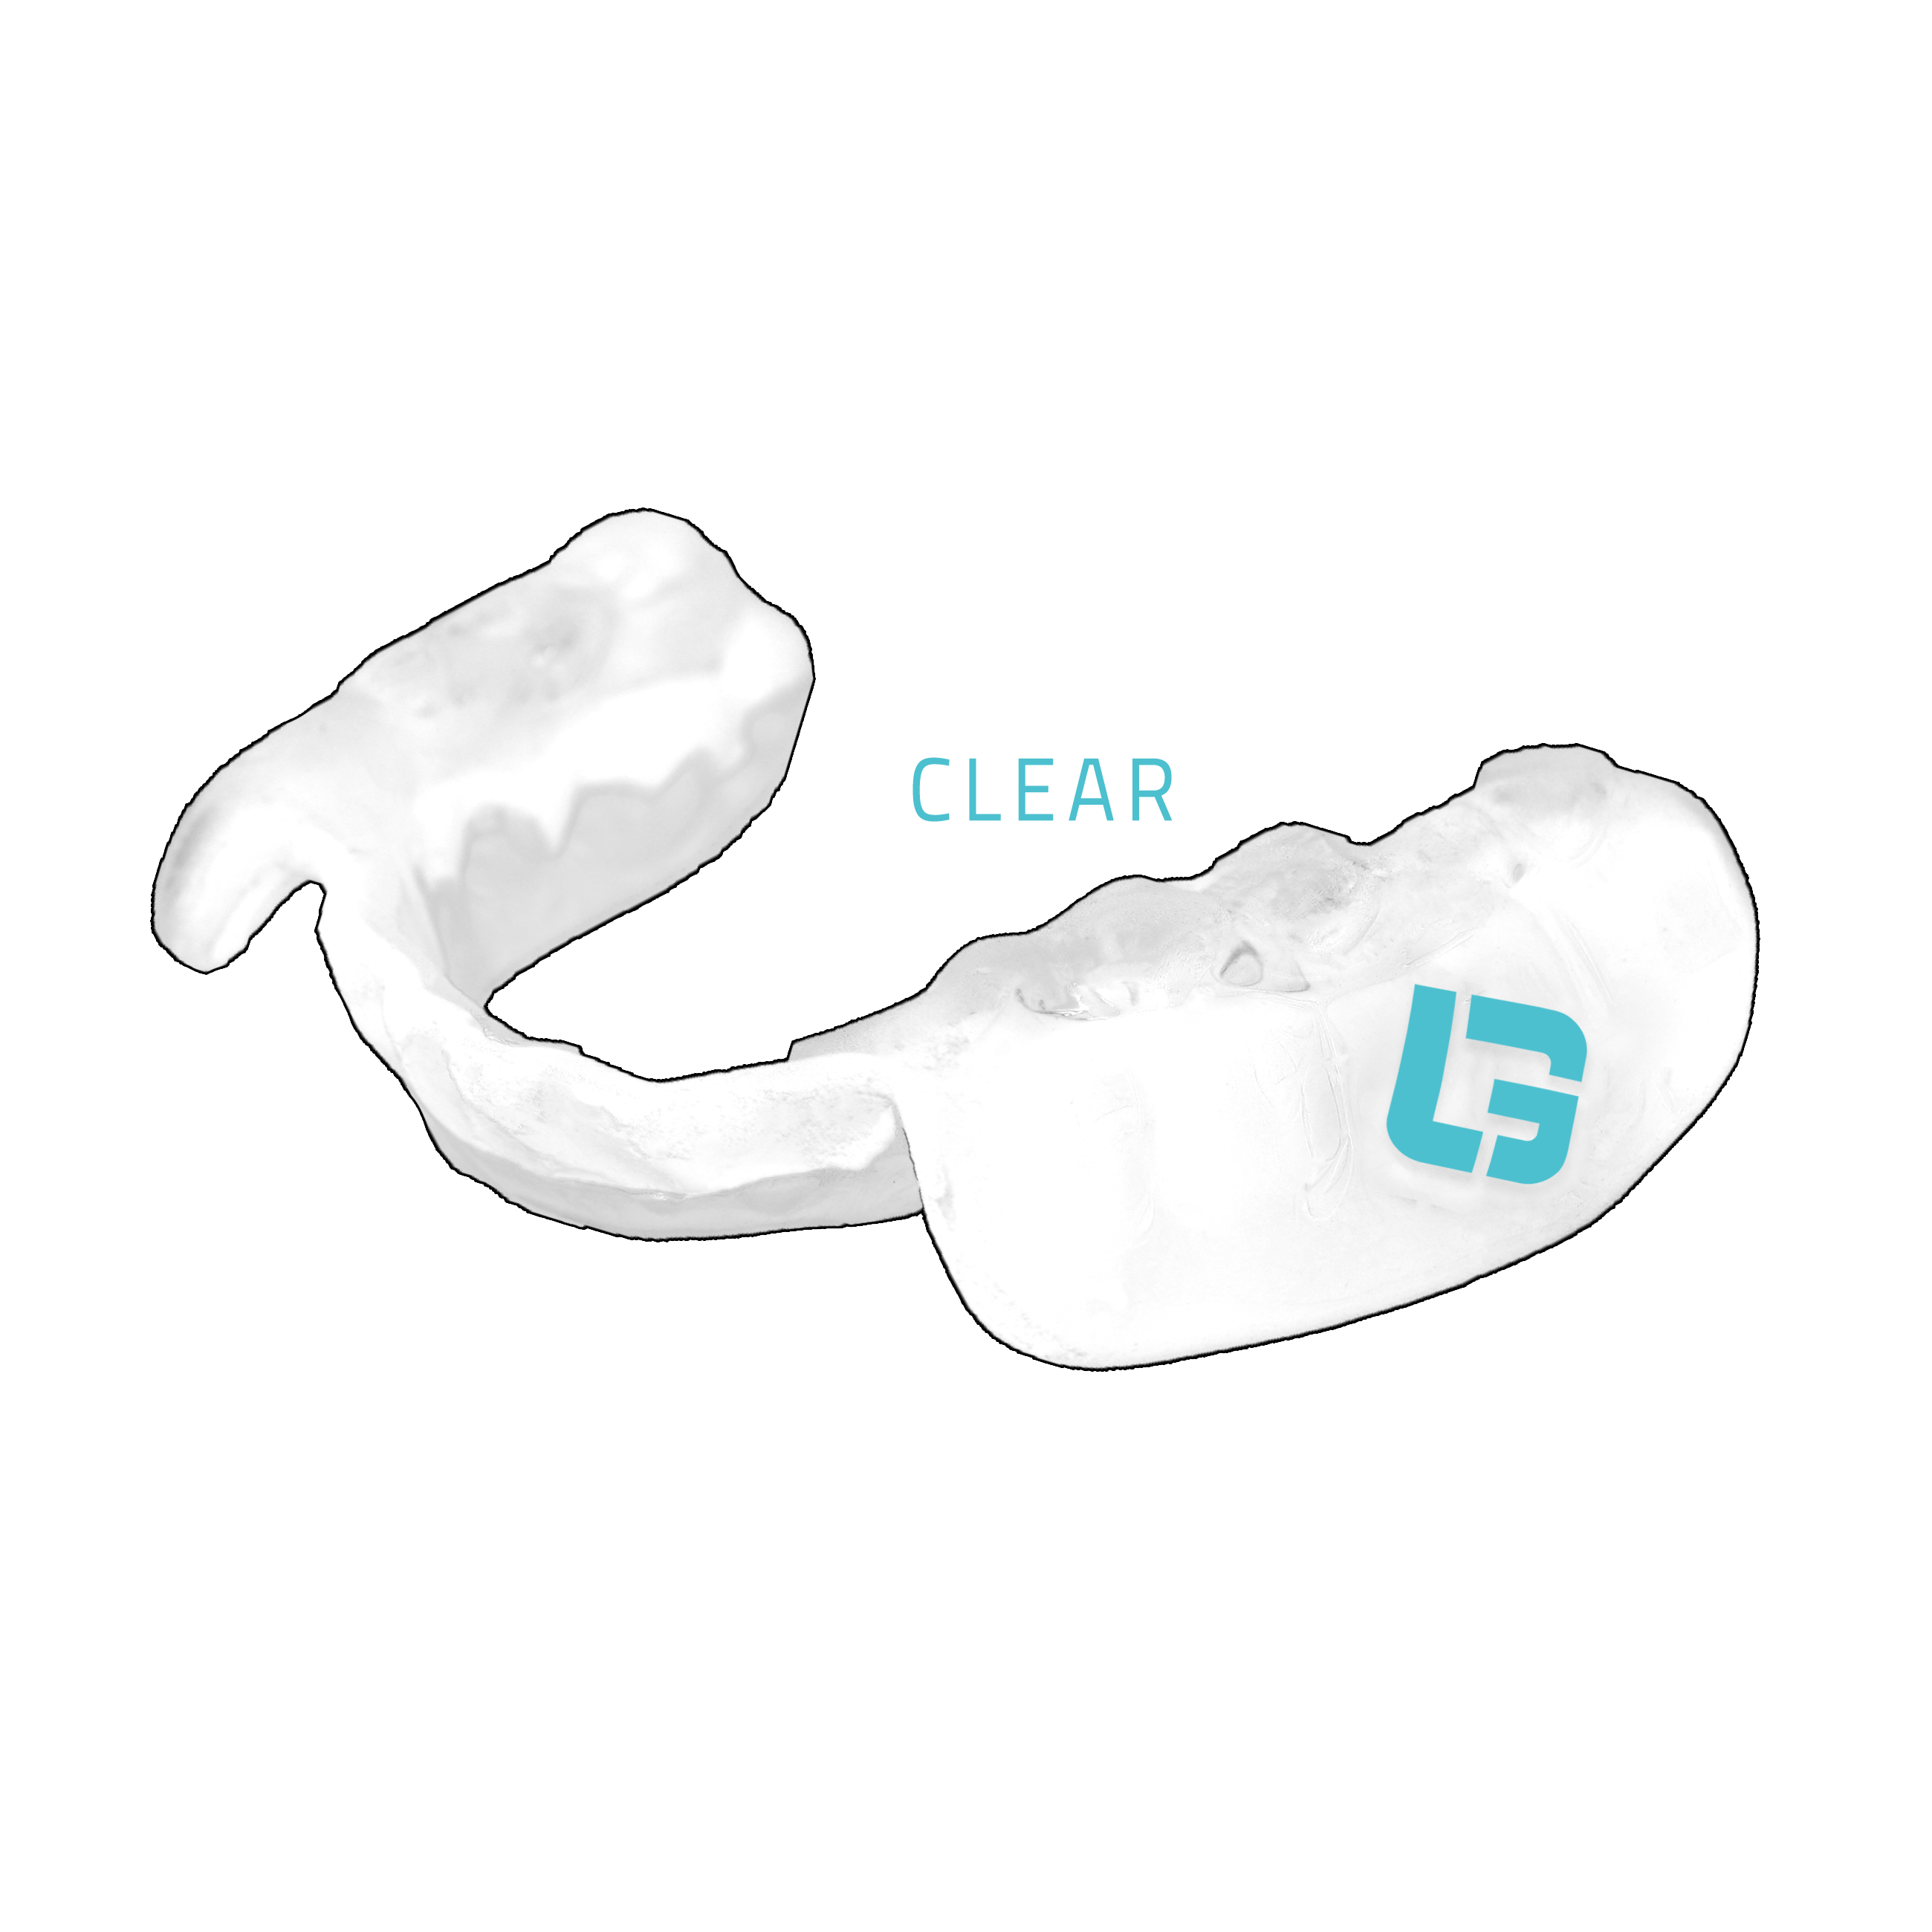 clear lower jaw bottom performance mouthguard by GuardLab ARC neuromuscular baseball weightlifting 